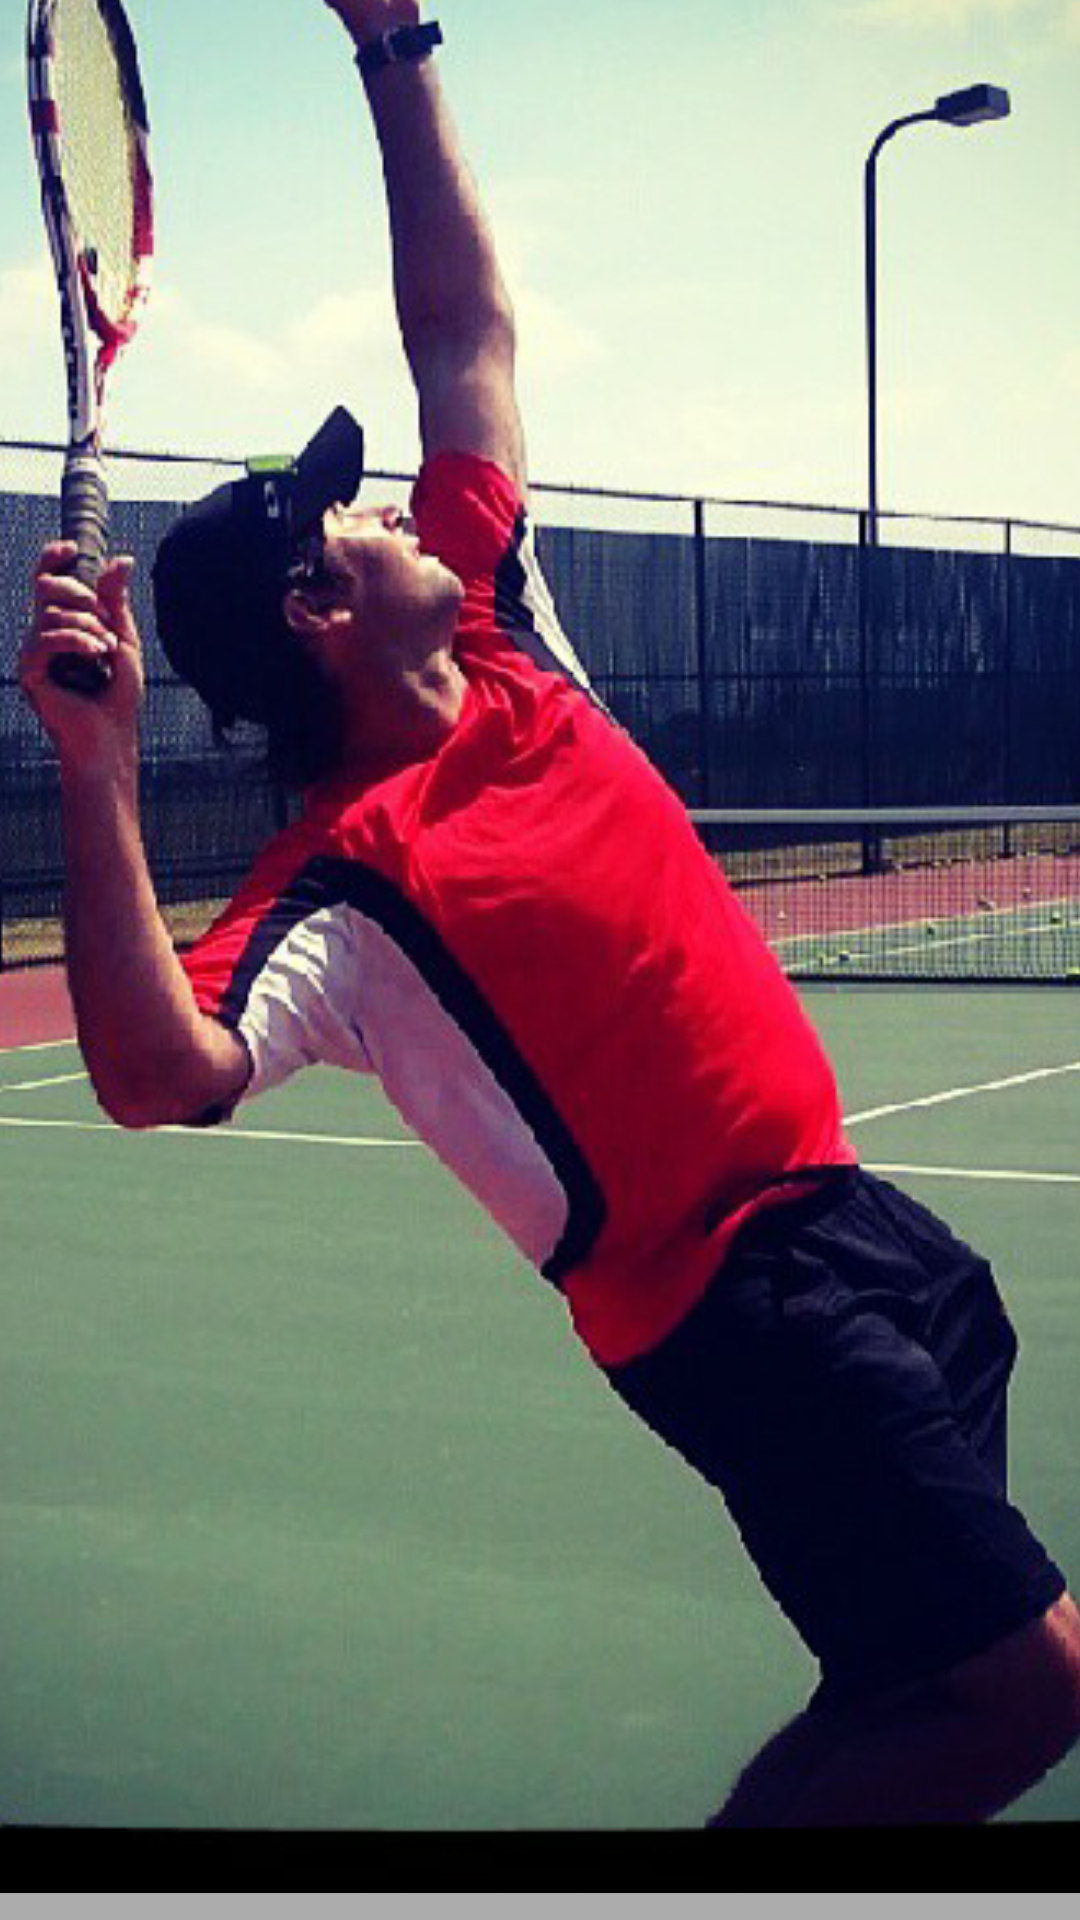 Andres I. teaches tennis lessons in Allen, TX